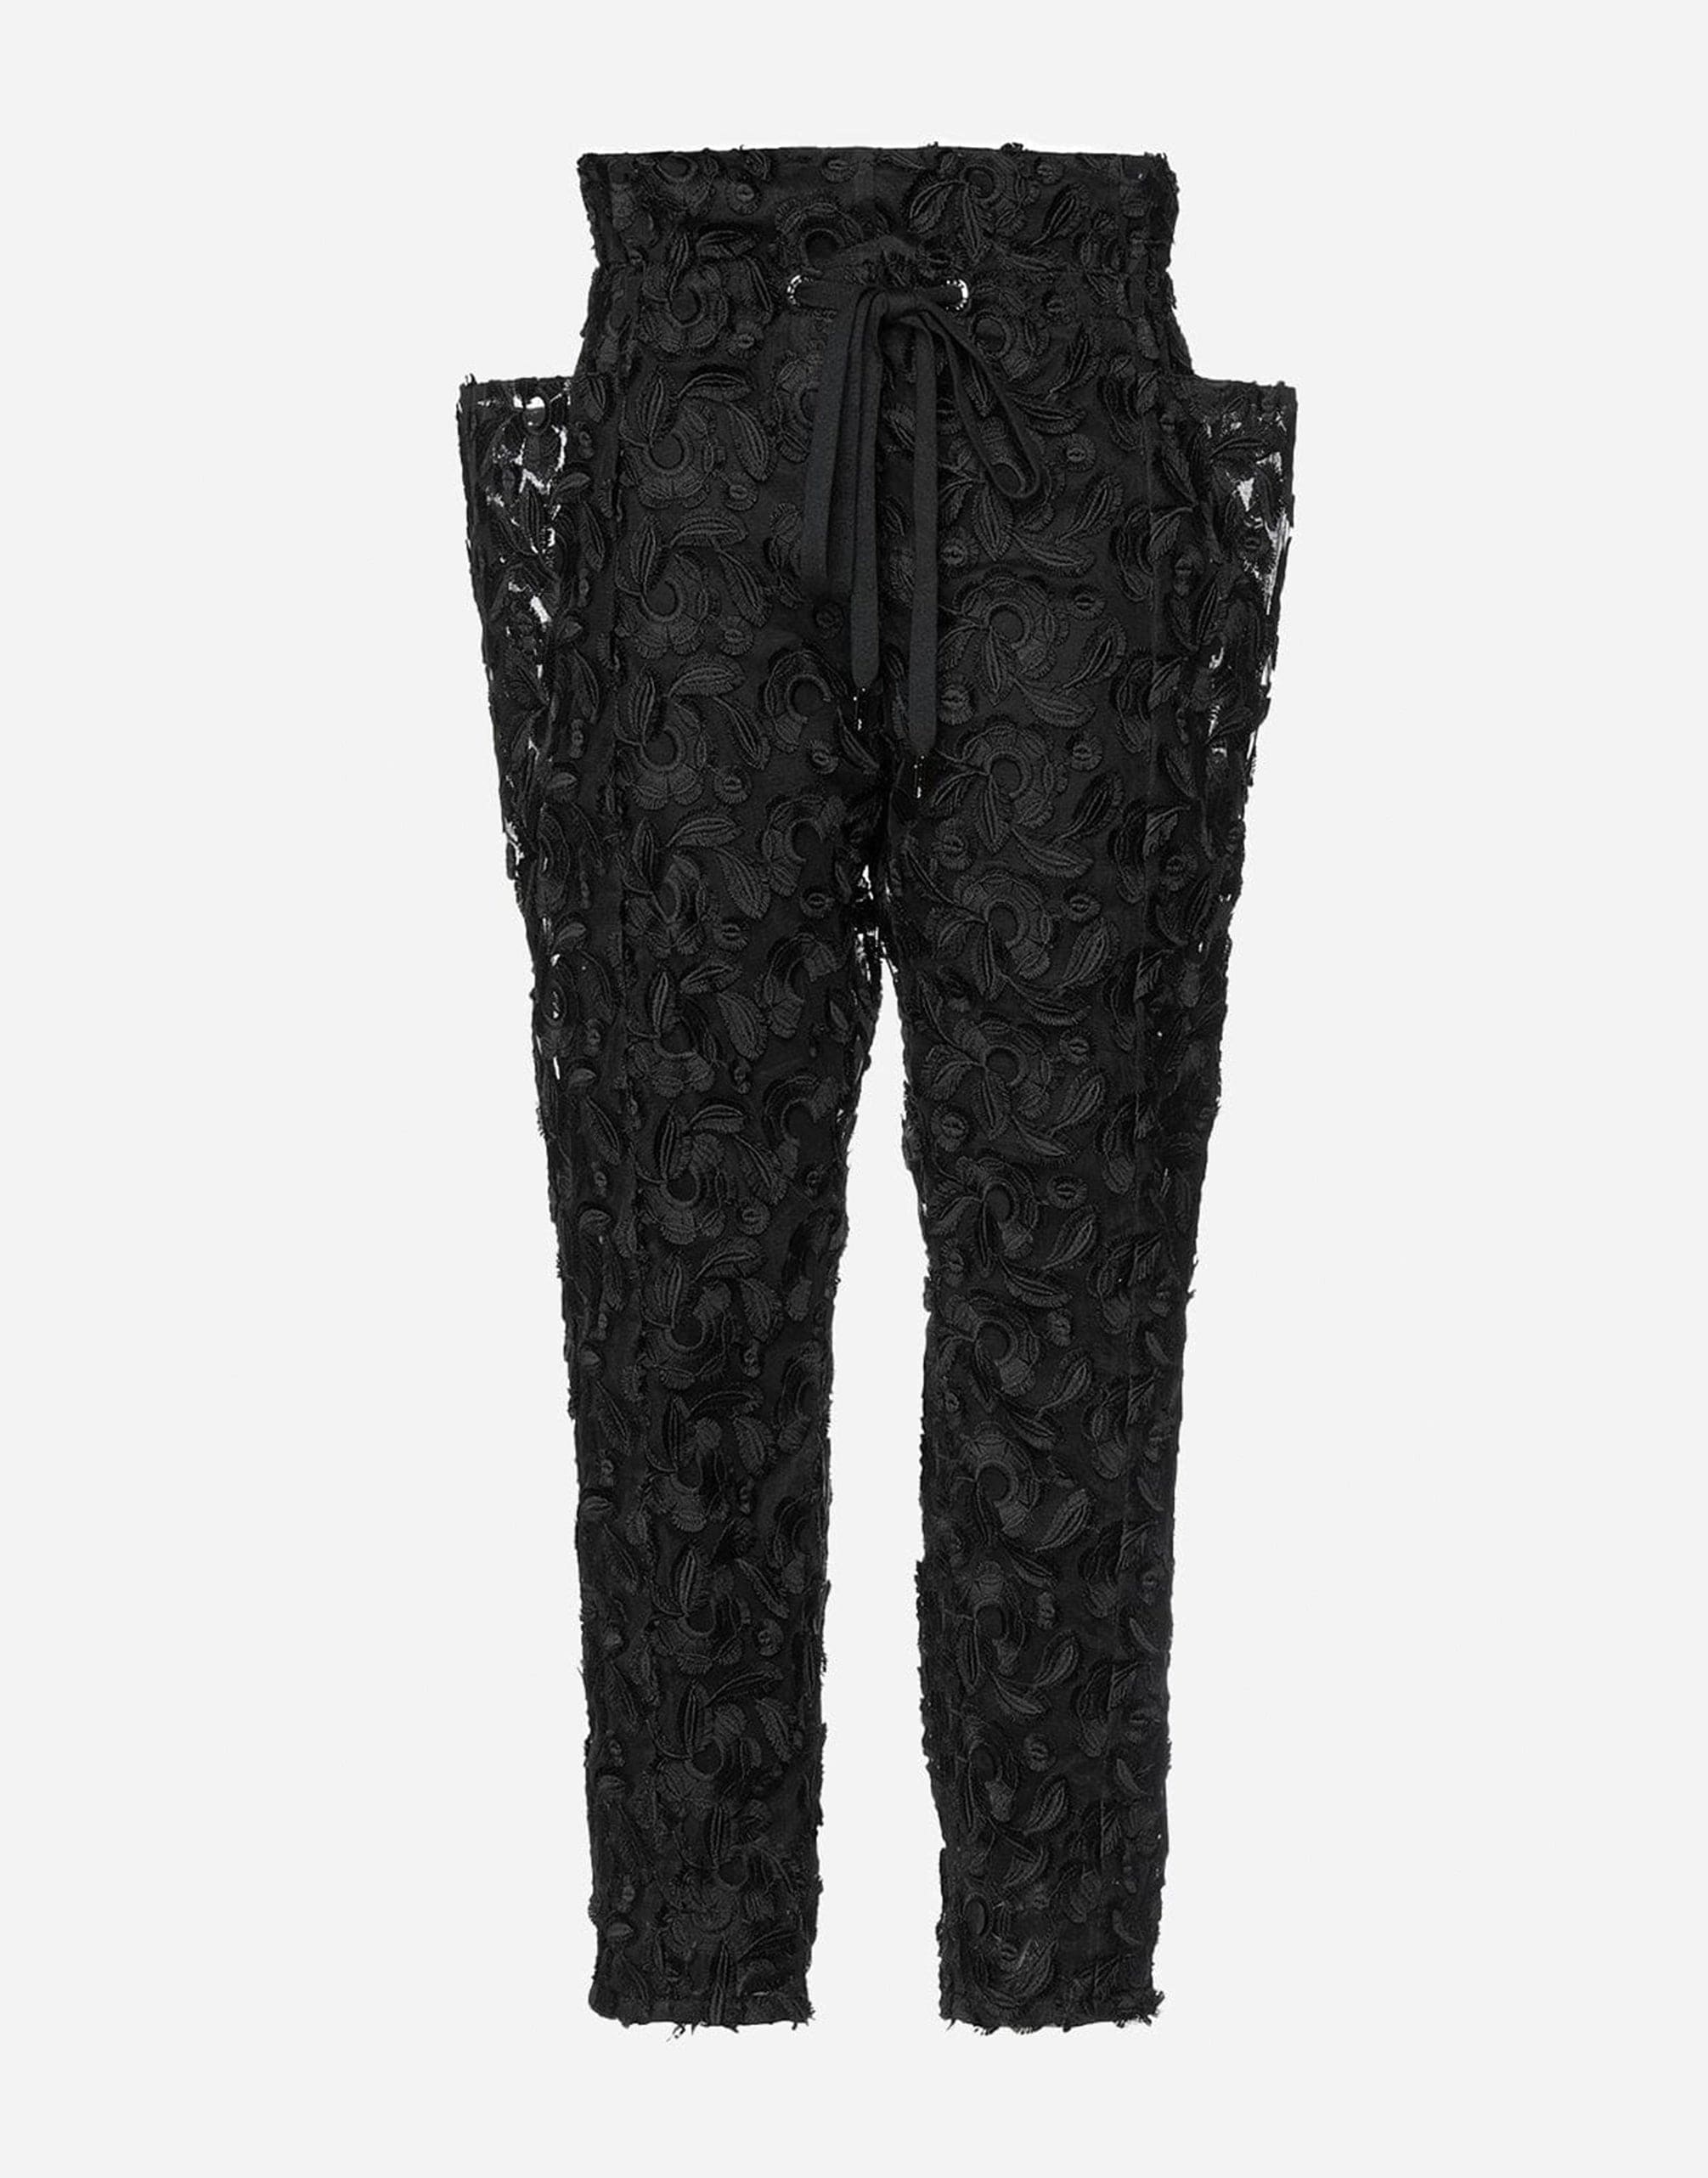 Dolce & Gabbana Floral Lace Tapered Trousers